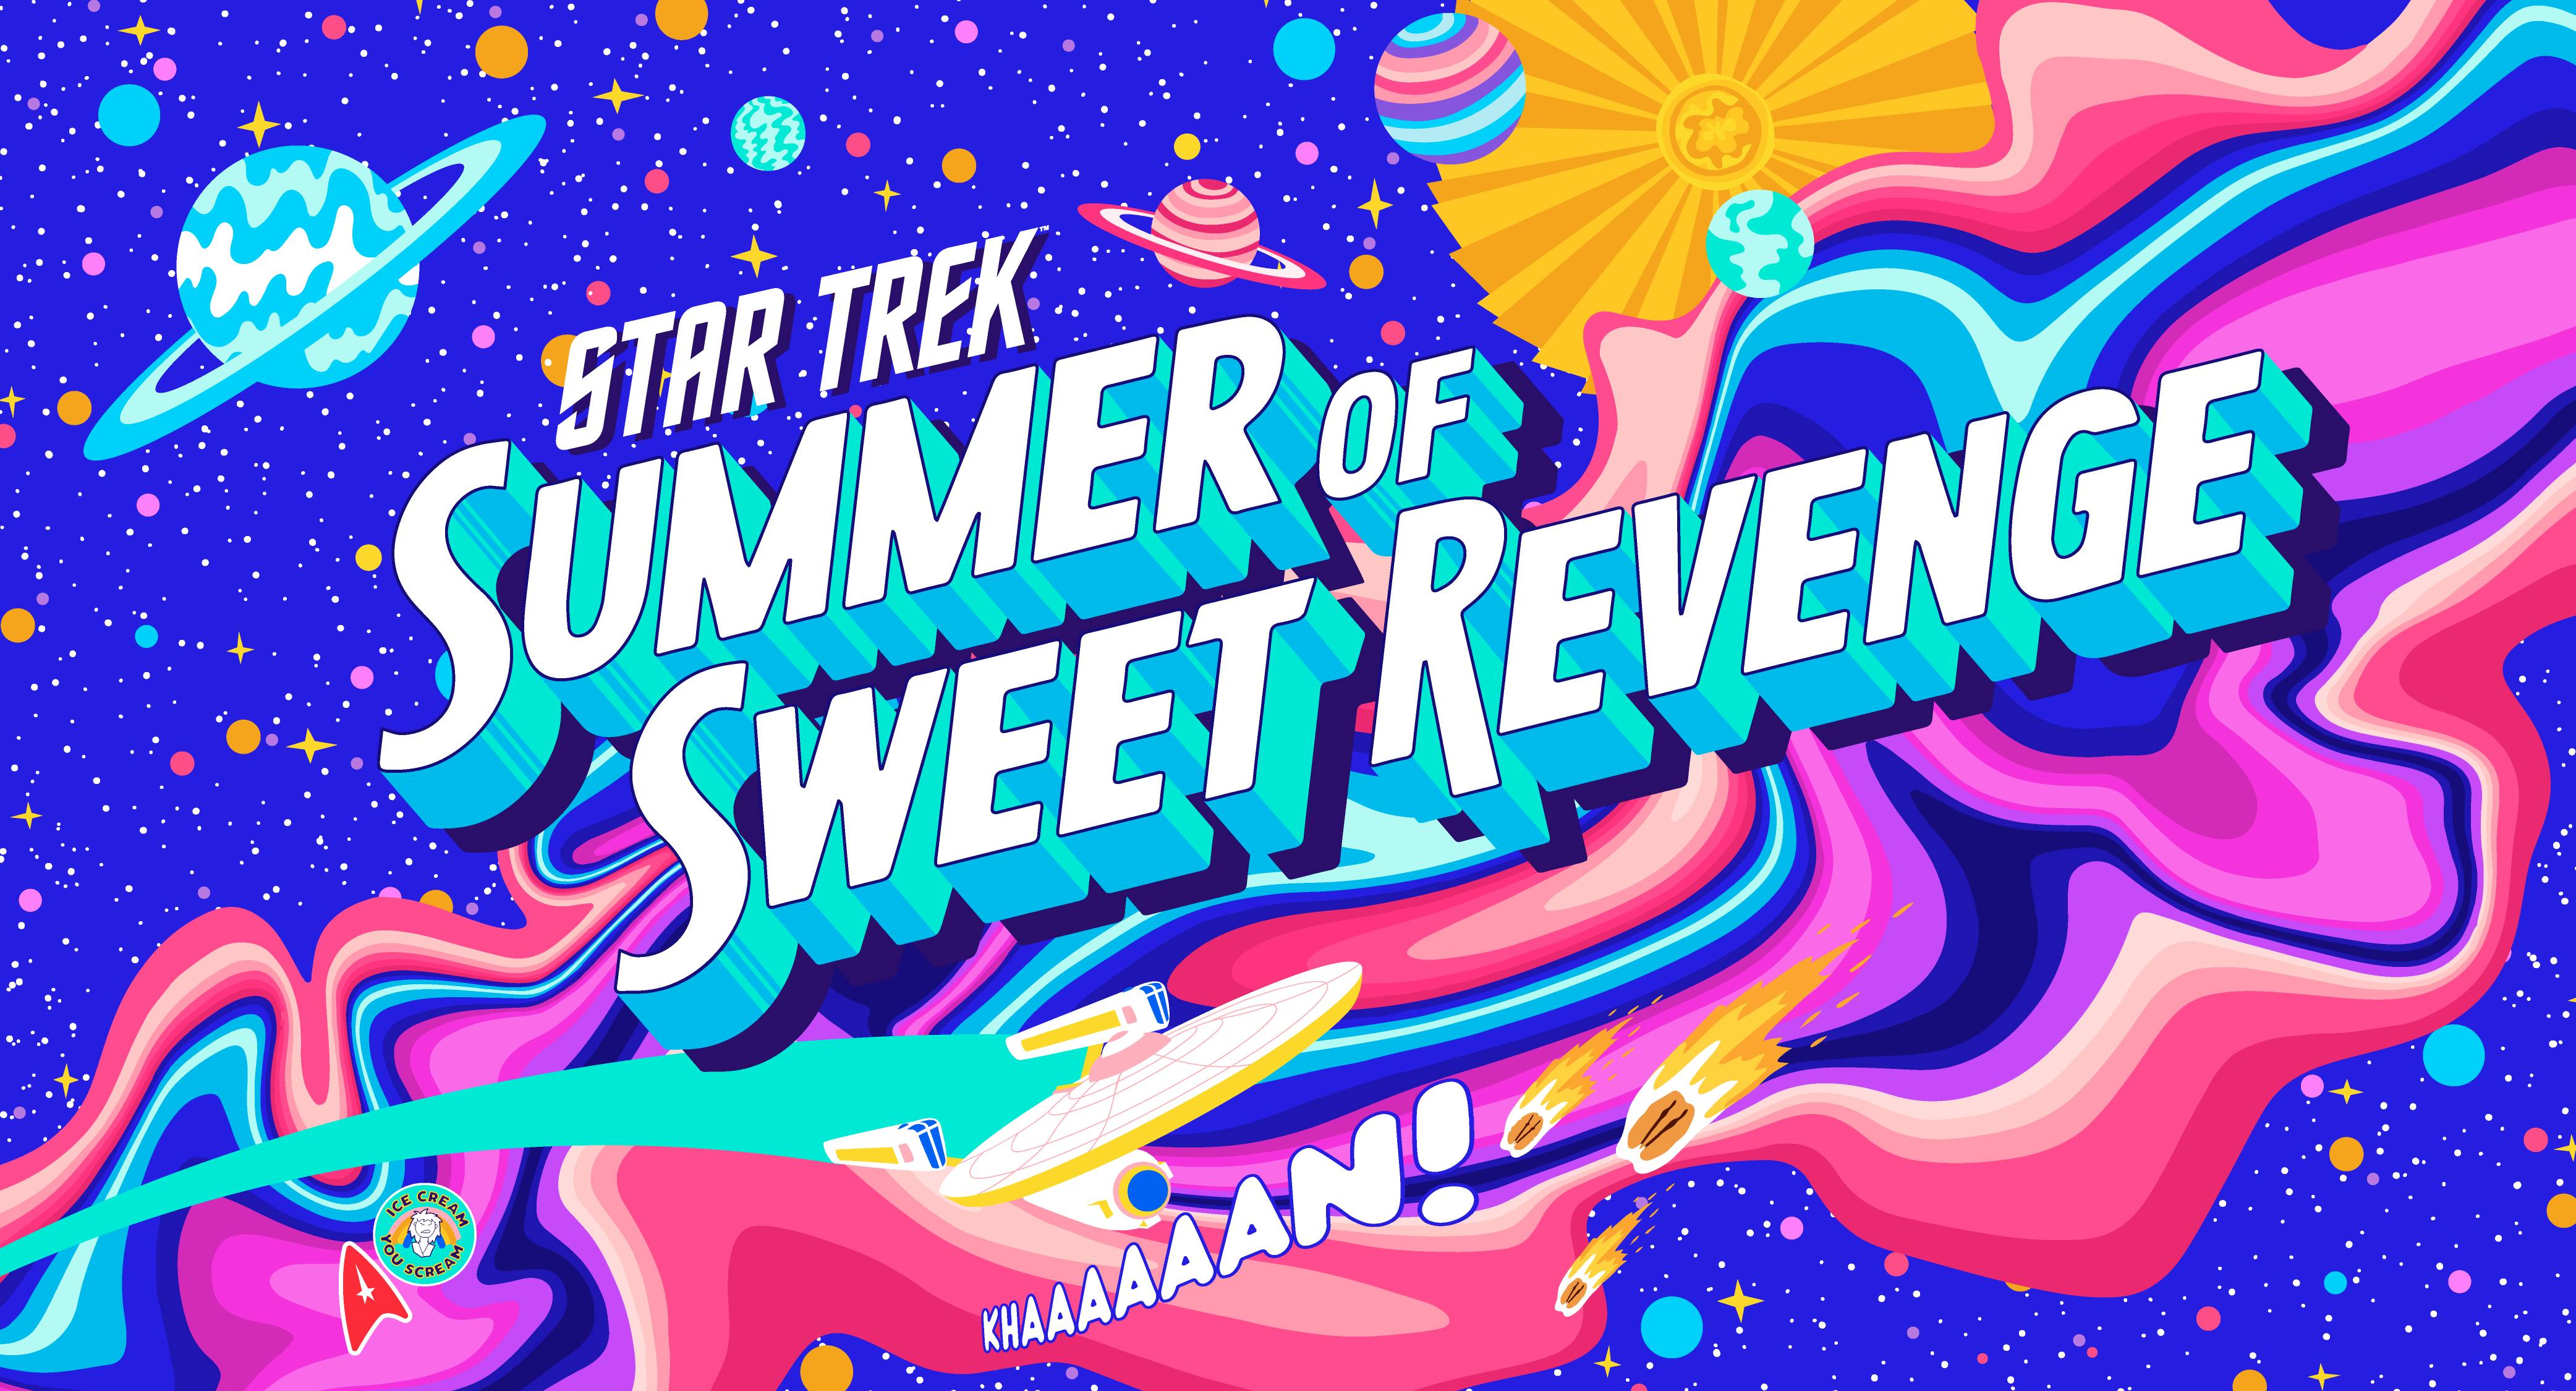 The phrase "Star Trek Summer of Sweet Revenge" is displayed against an illustrated background